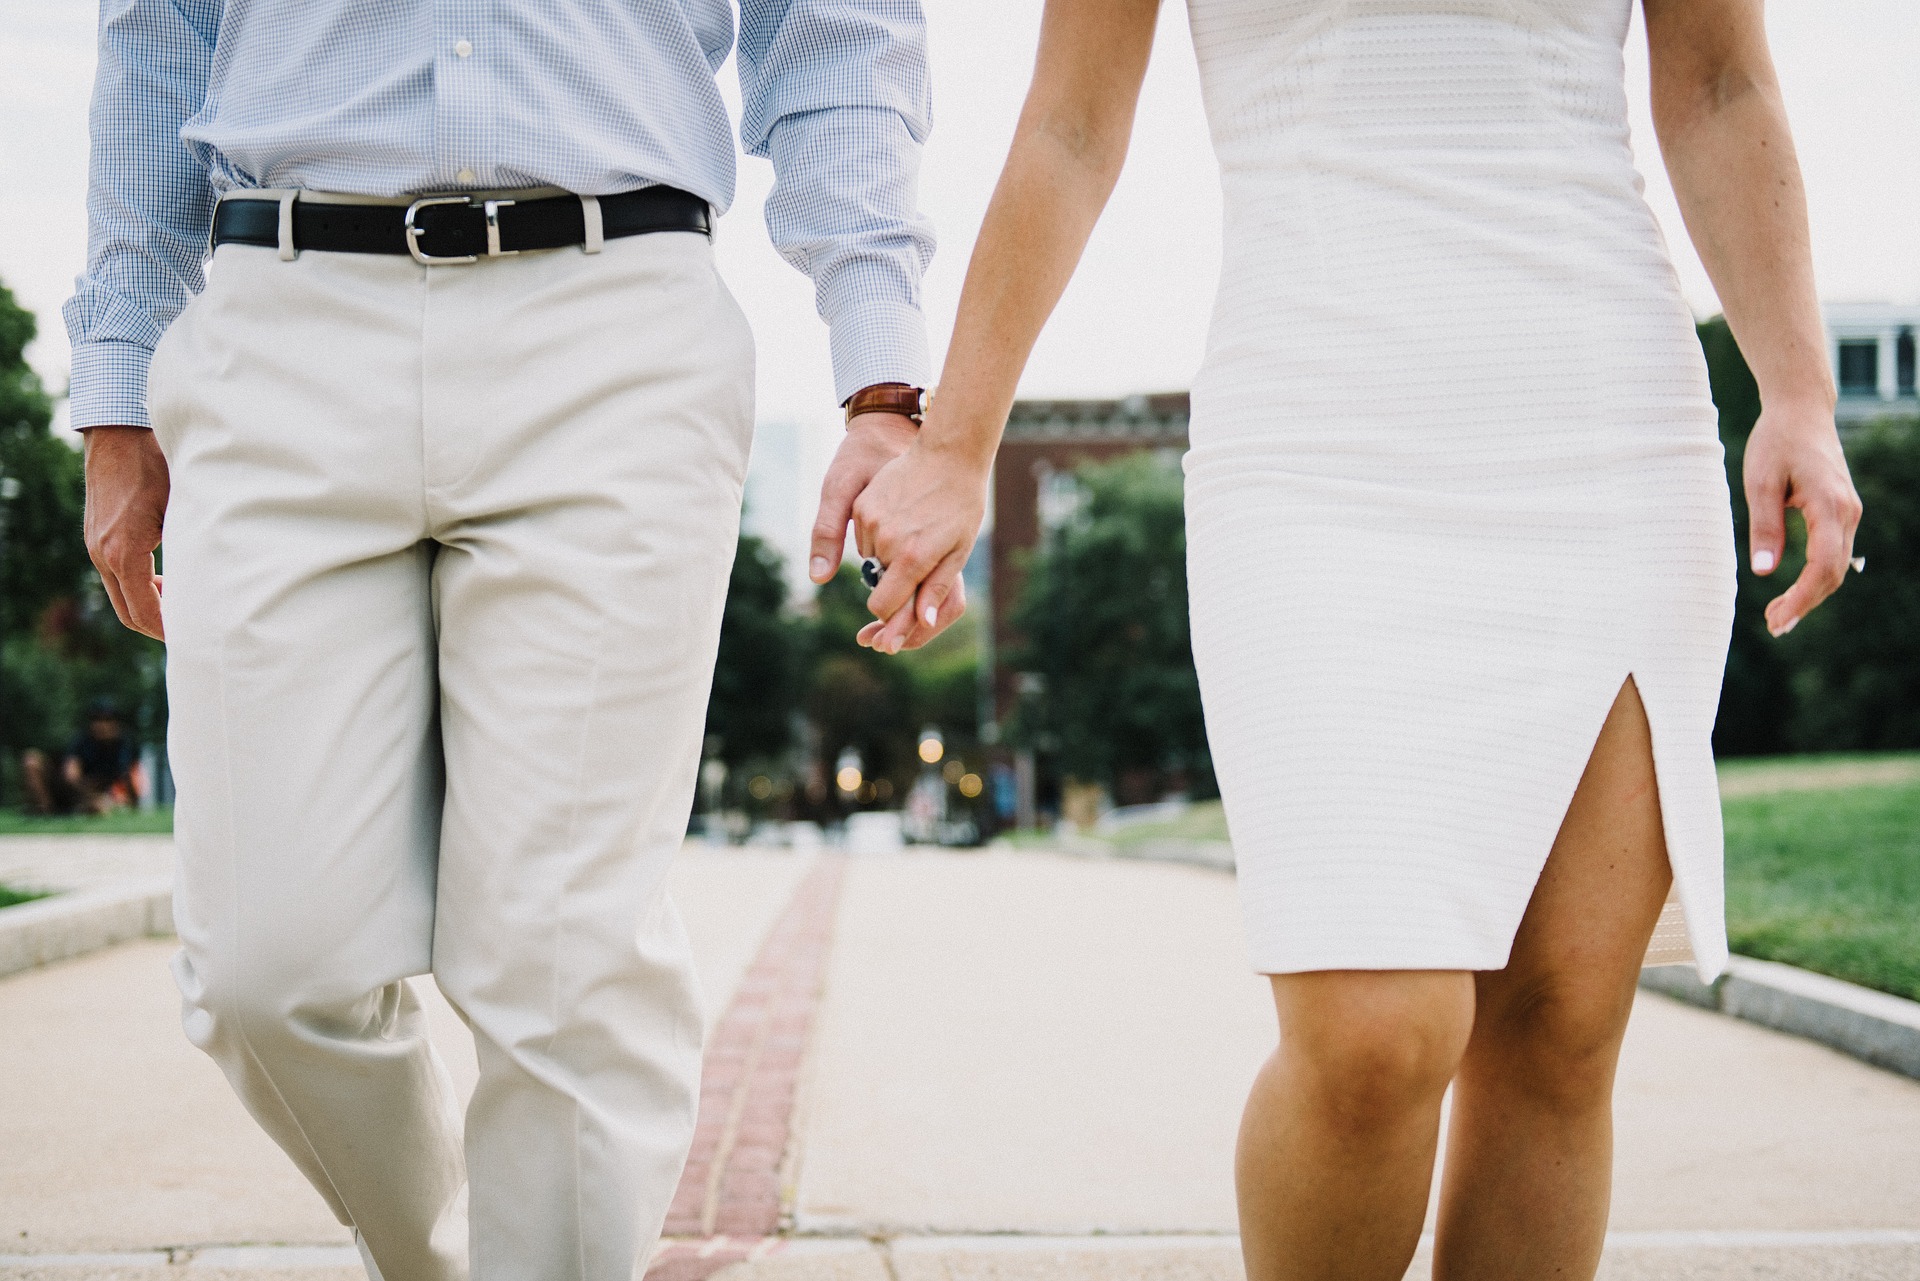 I'm marrying a non-citizen. Can they get Social Security benefits? -  